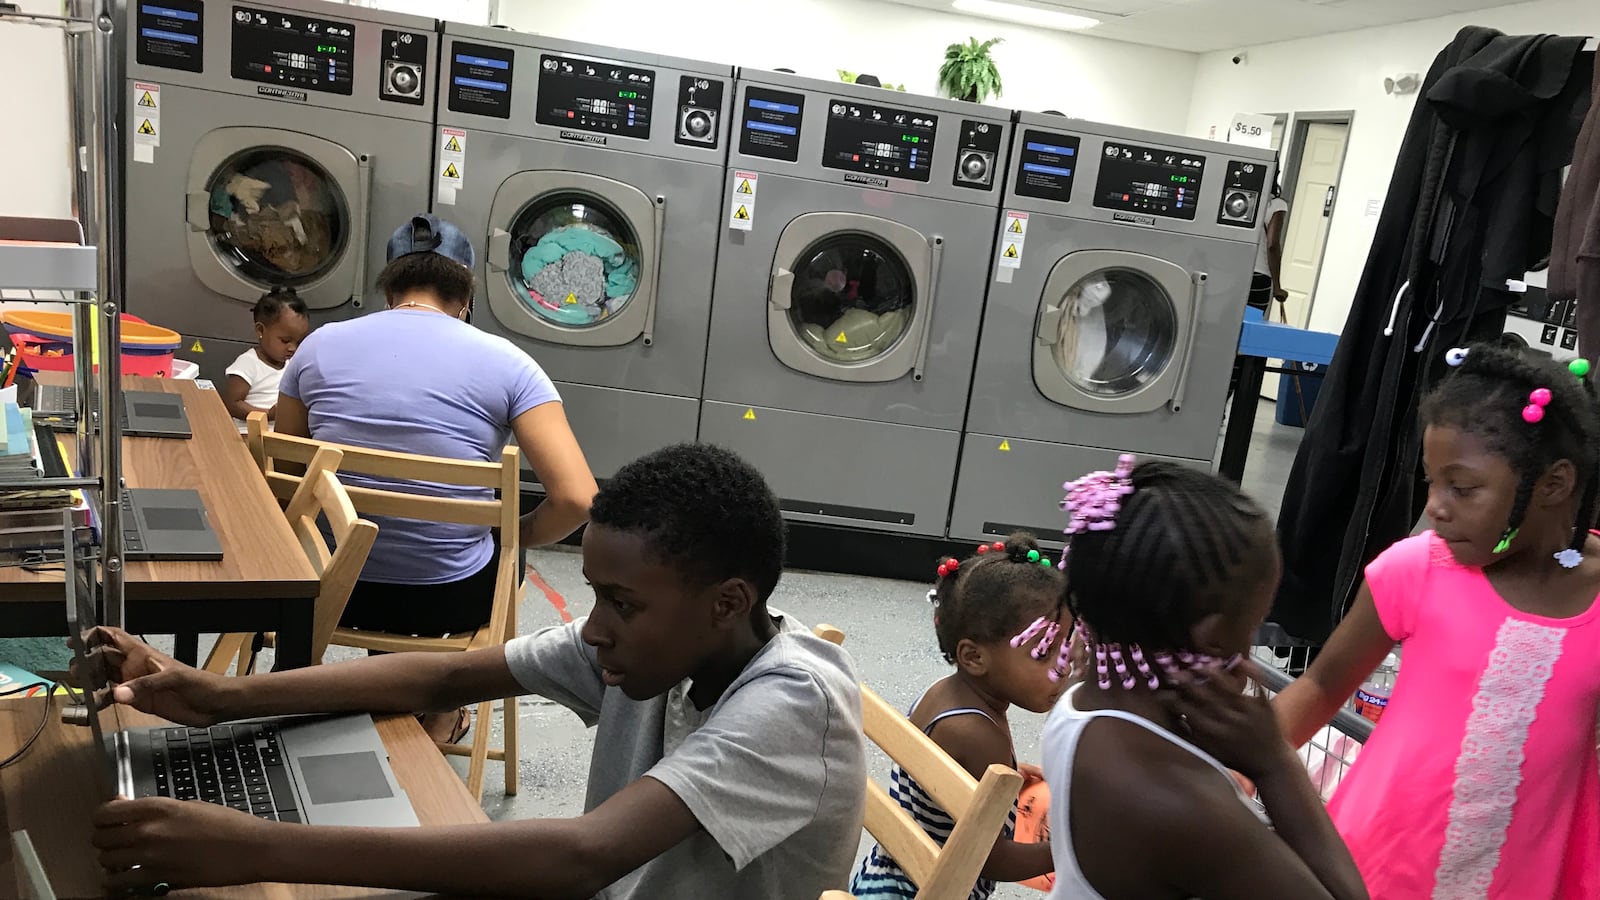 Children at Detroit's Fit and Fold laundromat now have computers to use and books to read while their parents do the wash — part of an effort to bring literacy programs to places where families are.